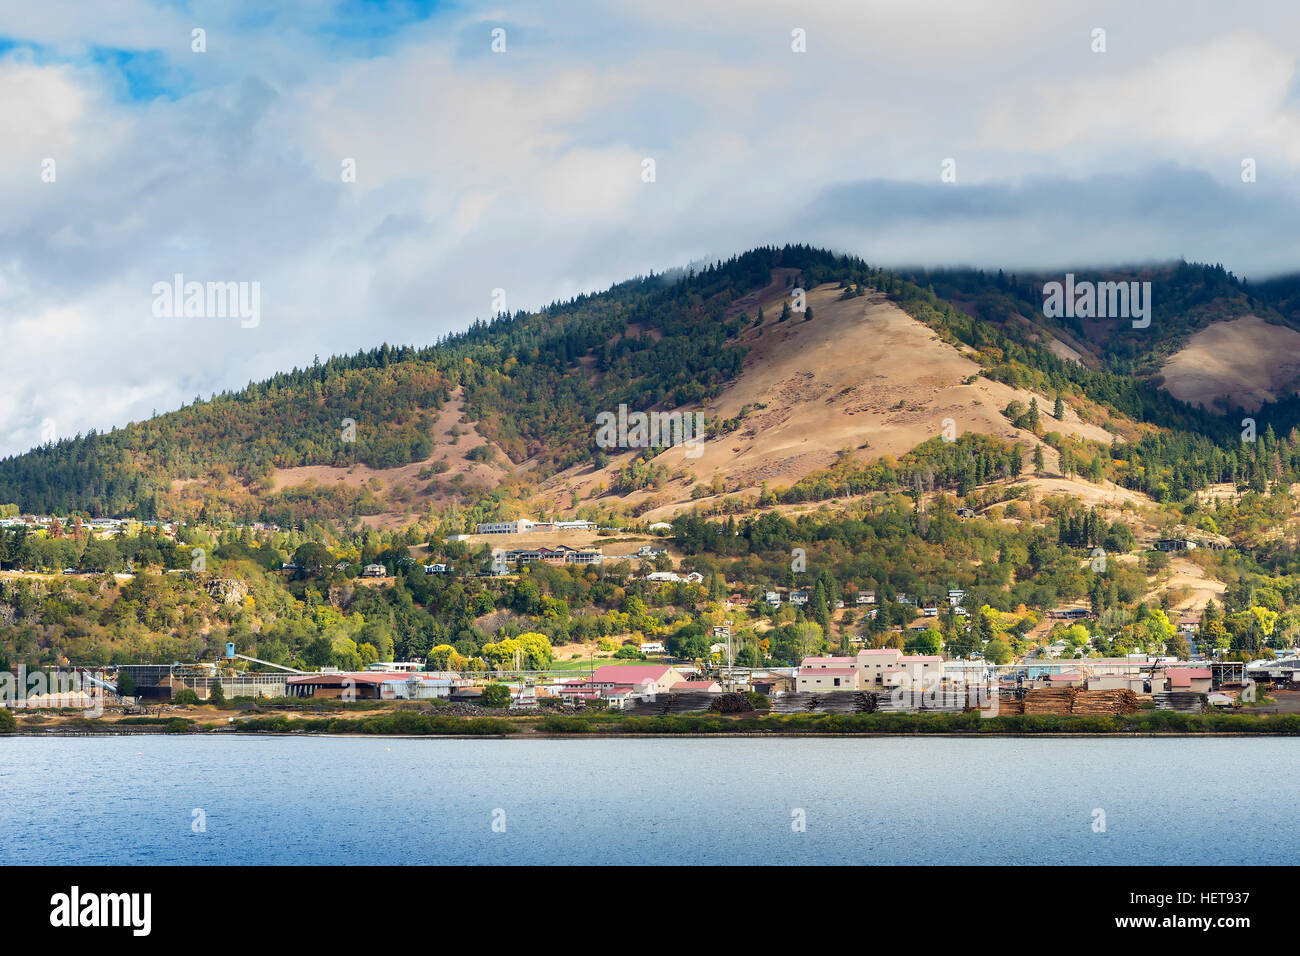 Lumber Mill on the Columbia River Gorge. Oregon. Stock Photo